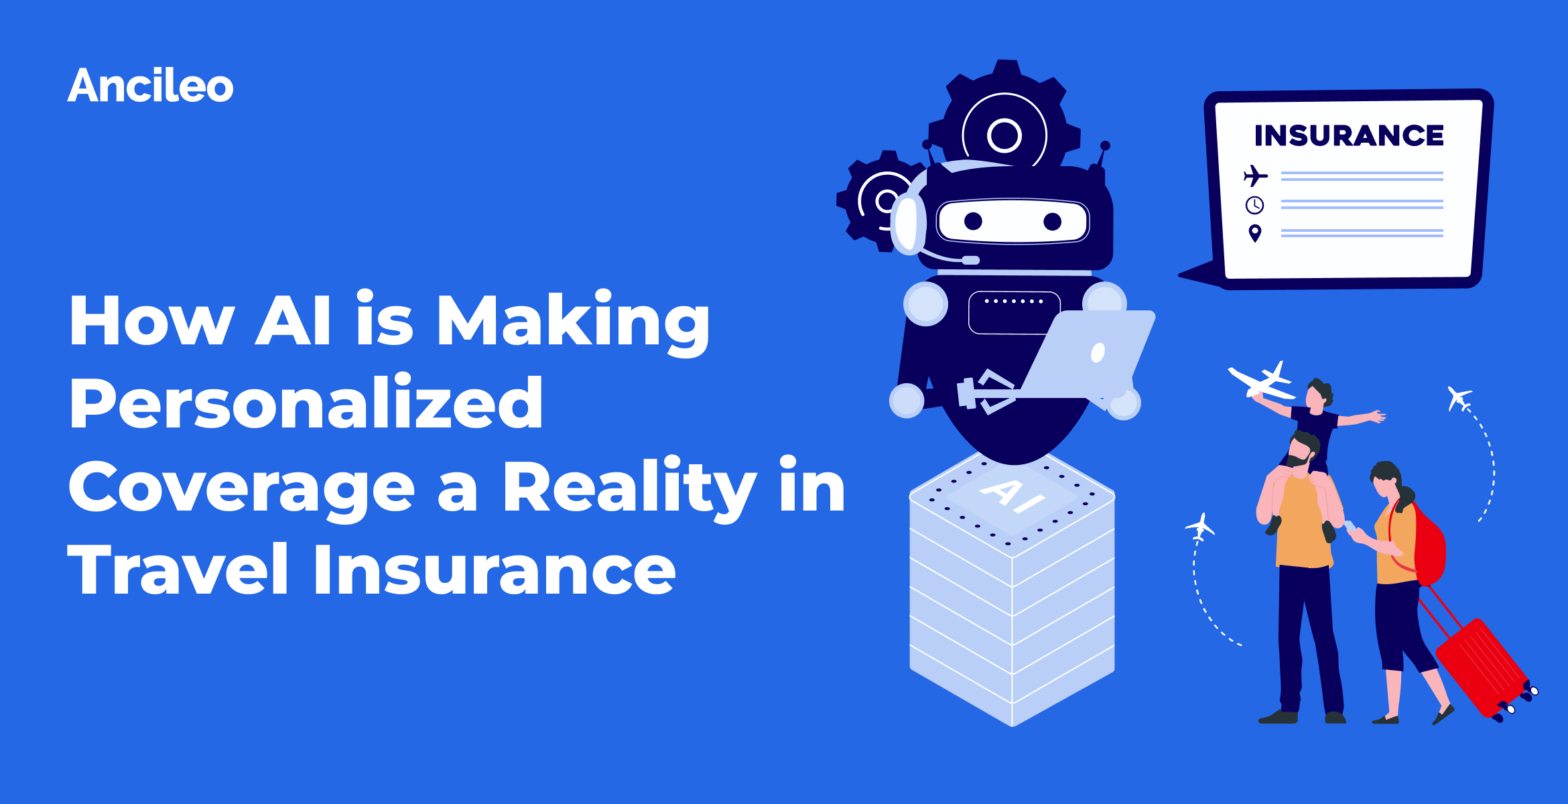 How AI is Making Personalized Coverage a Reality in Travel Insurance